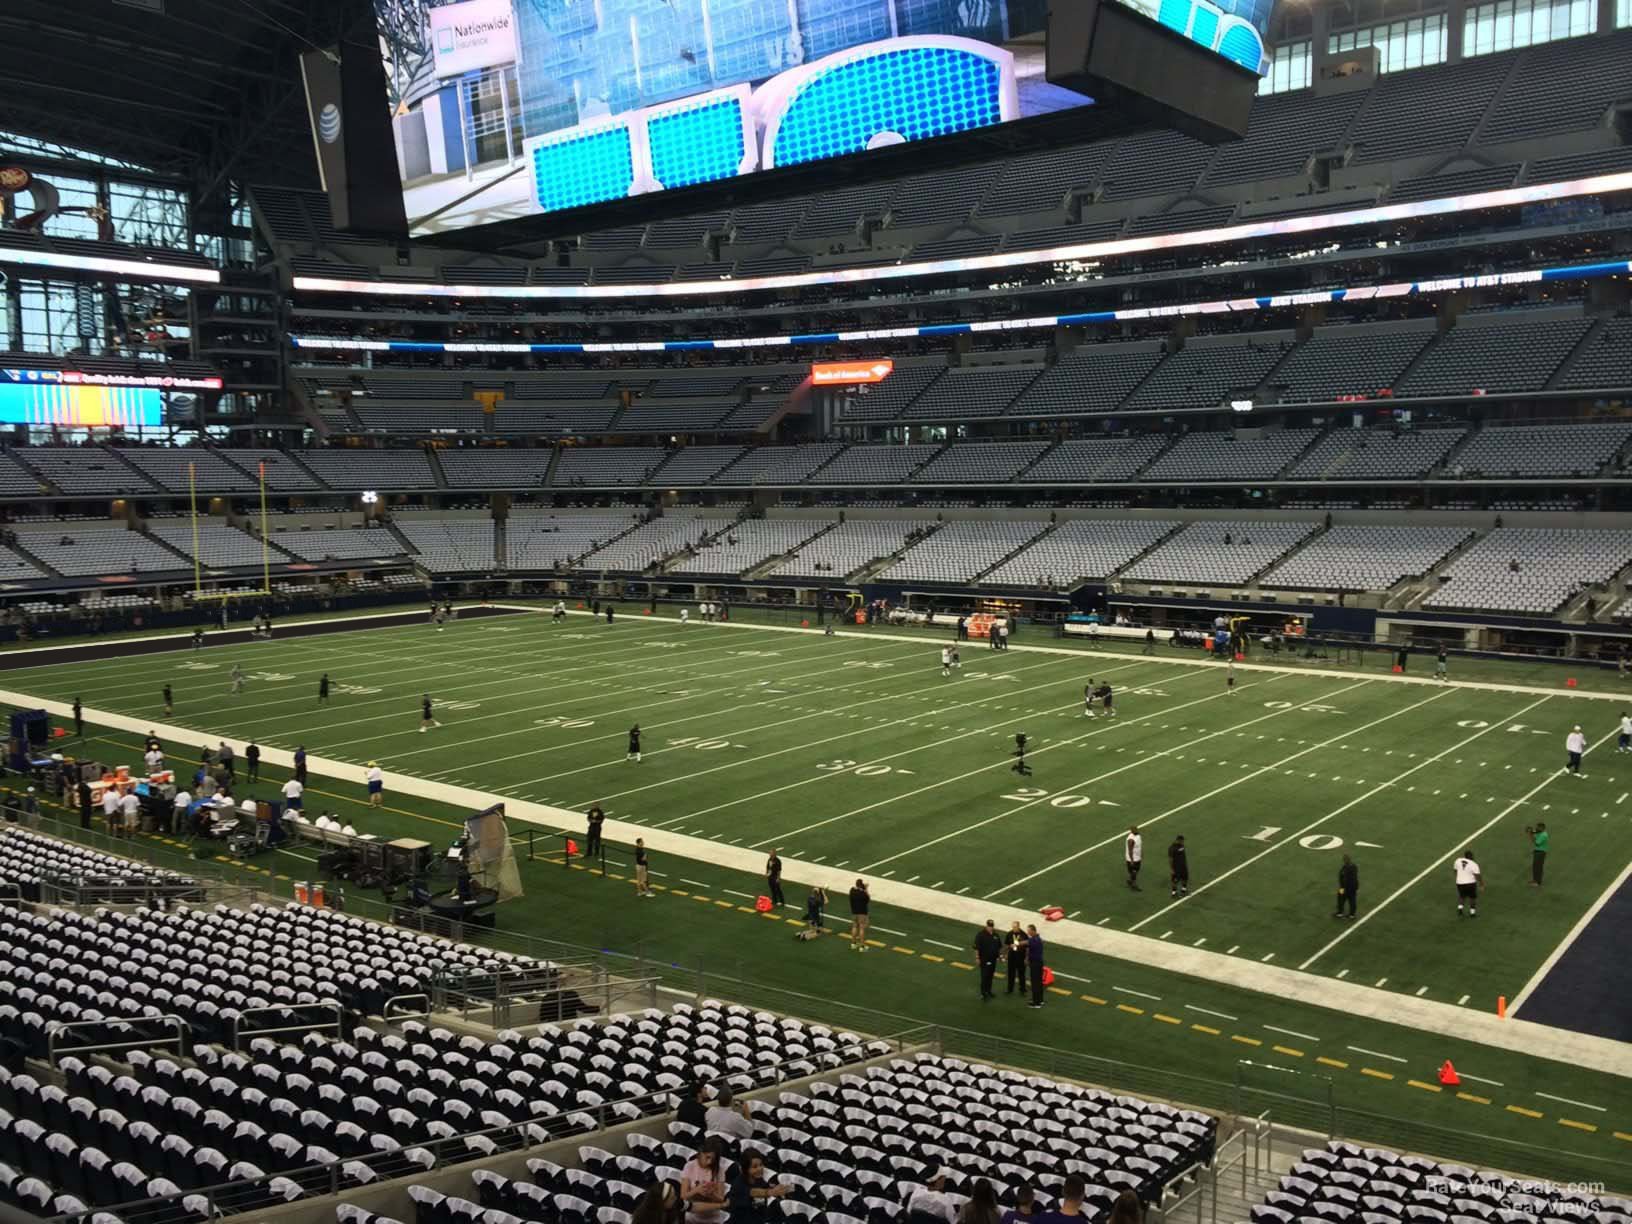 section 230, row 2 seat view  for football - at&t stadium (cowboys stadium)